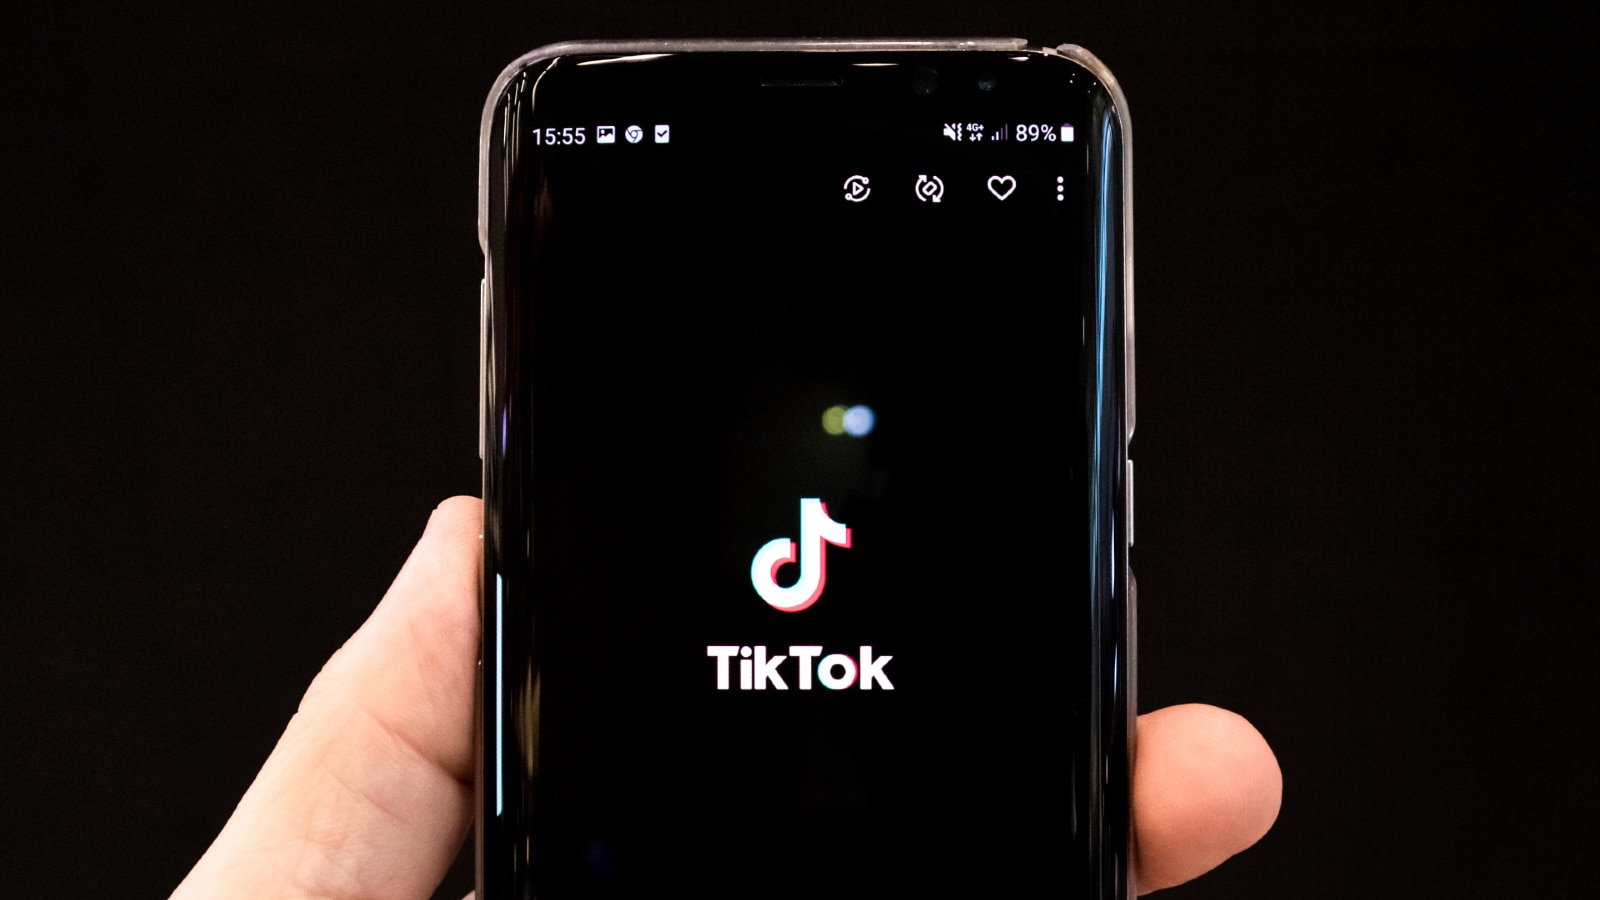 What does 14643 mean on TikTok?